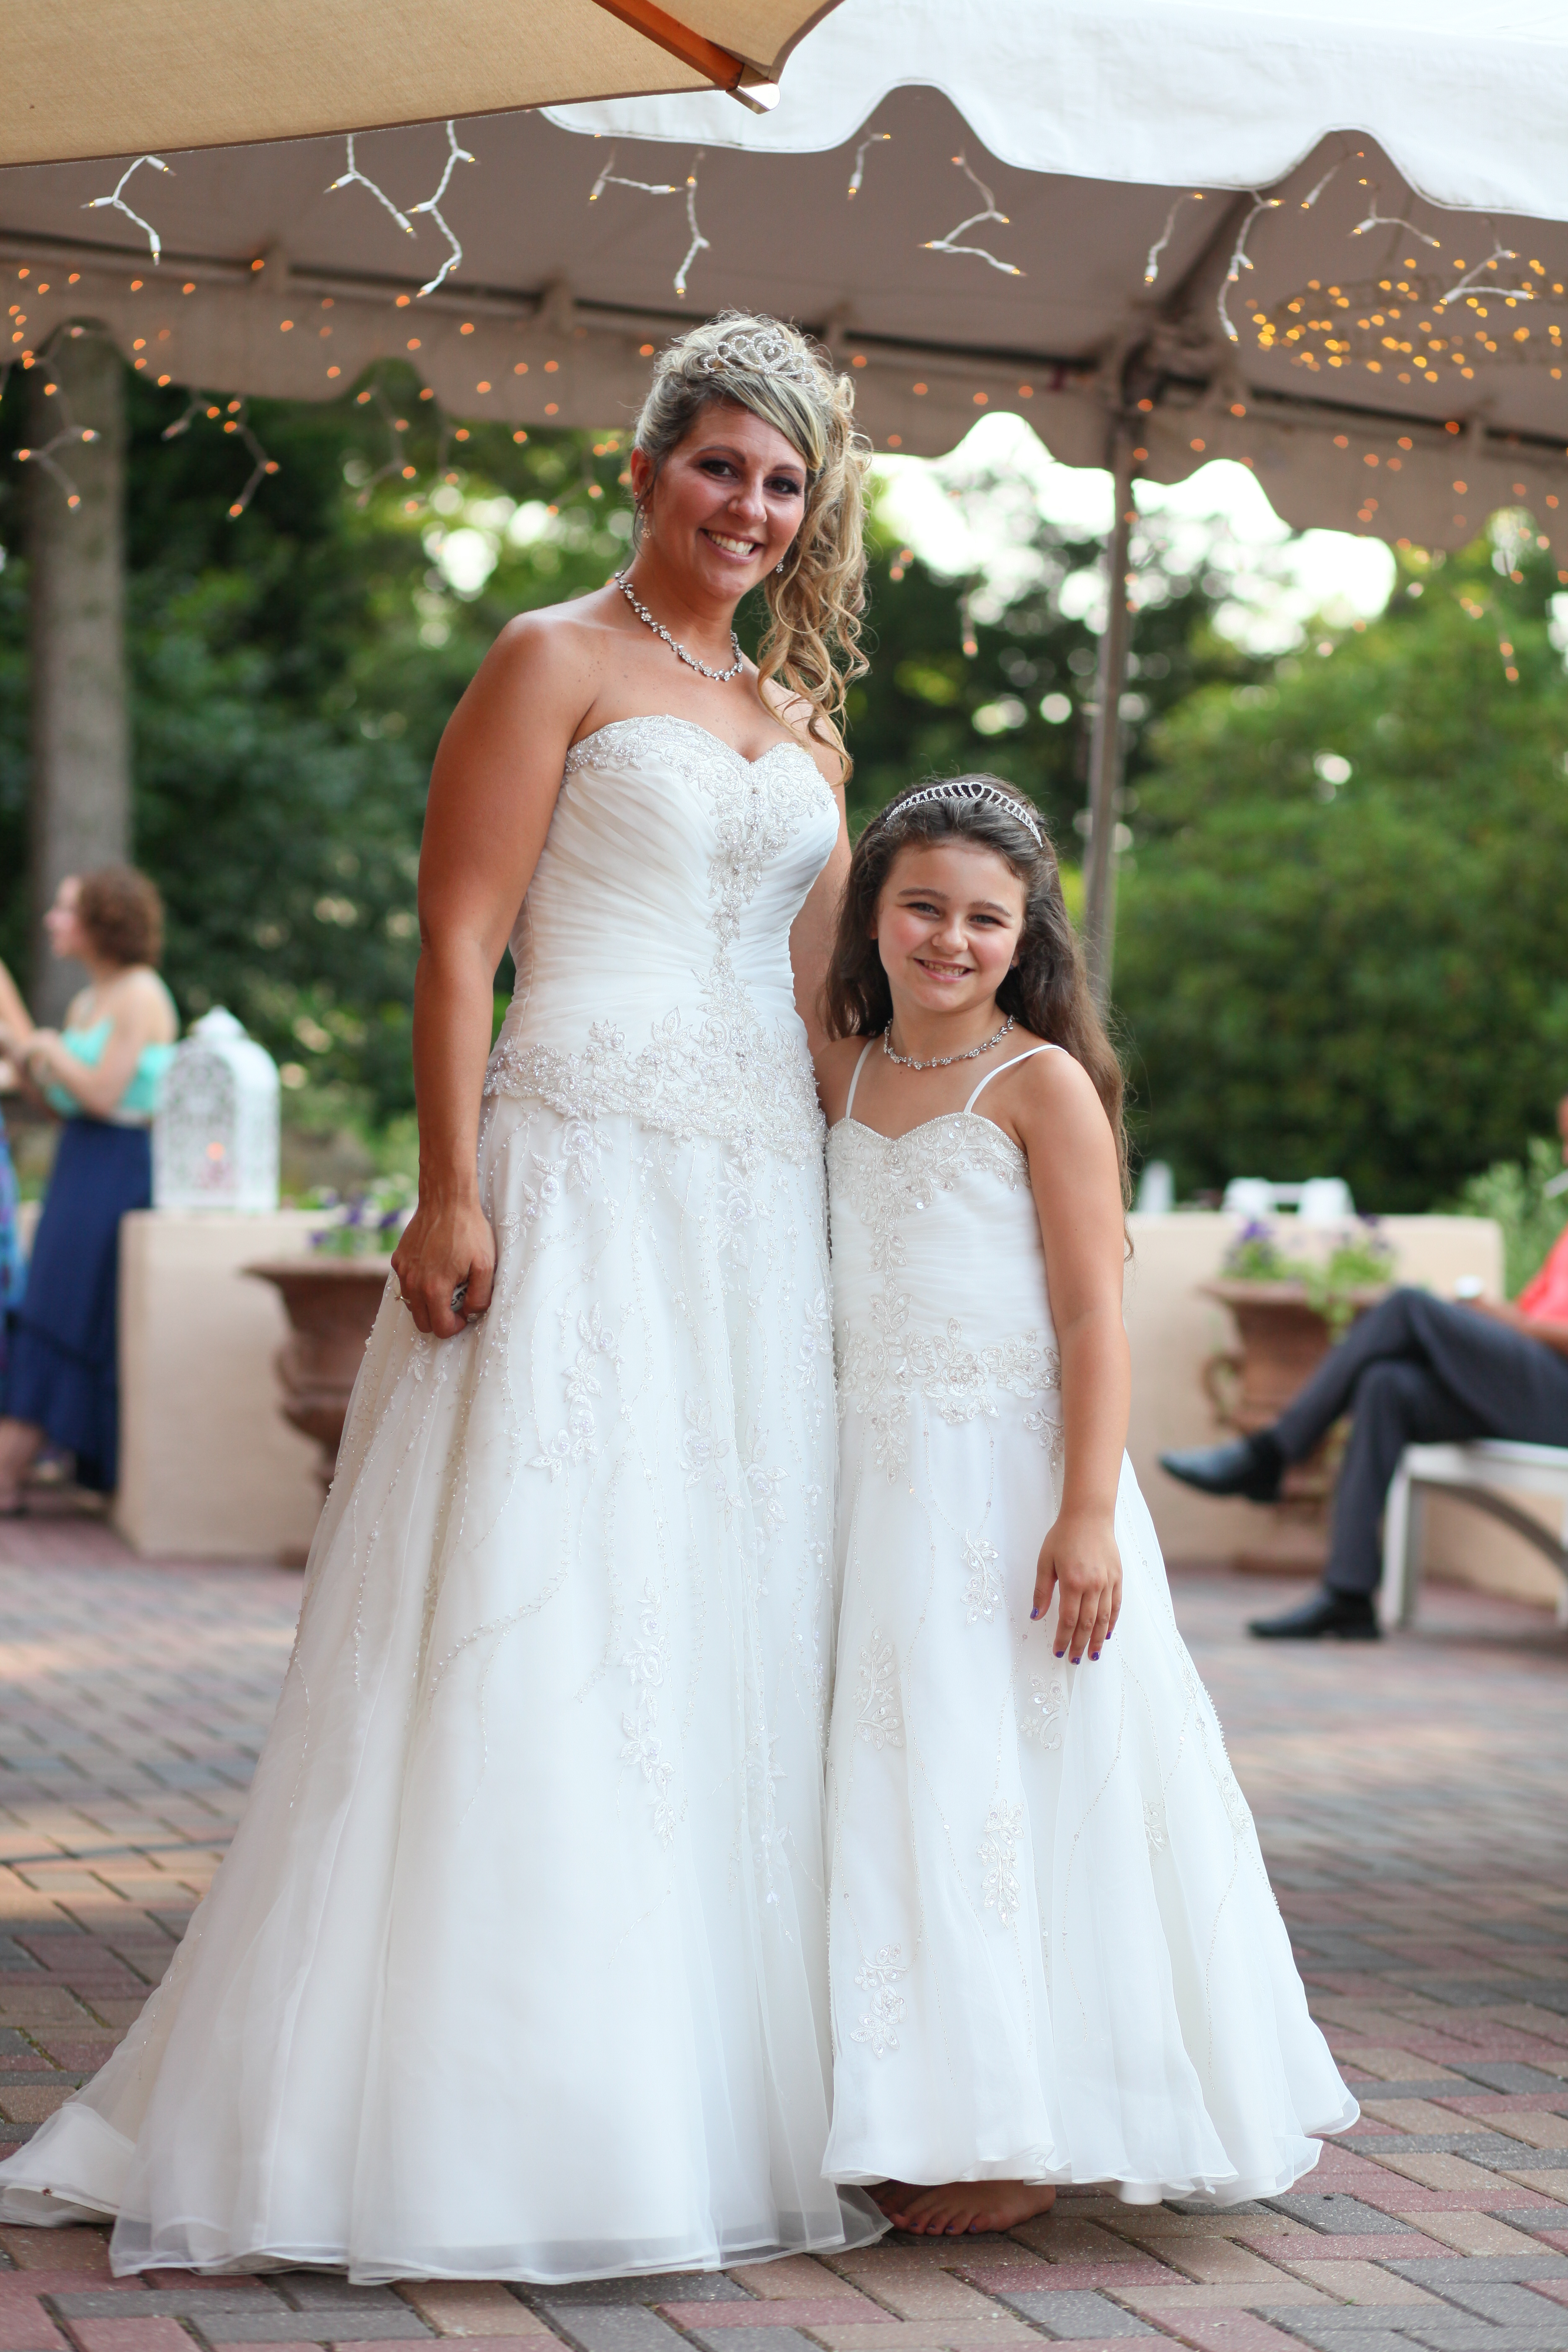 Matching Flower Girl and Wedding Dresses